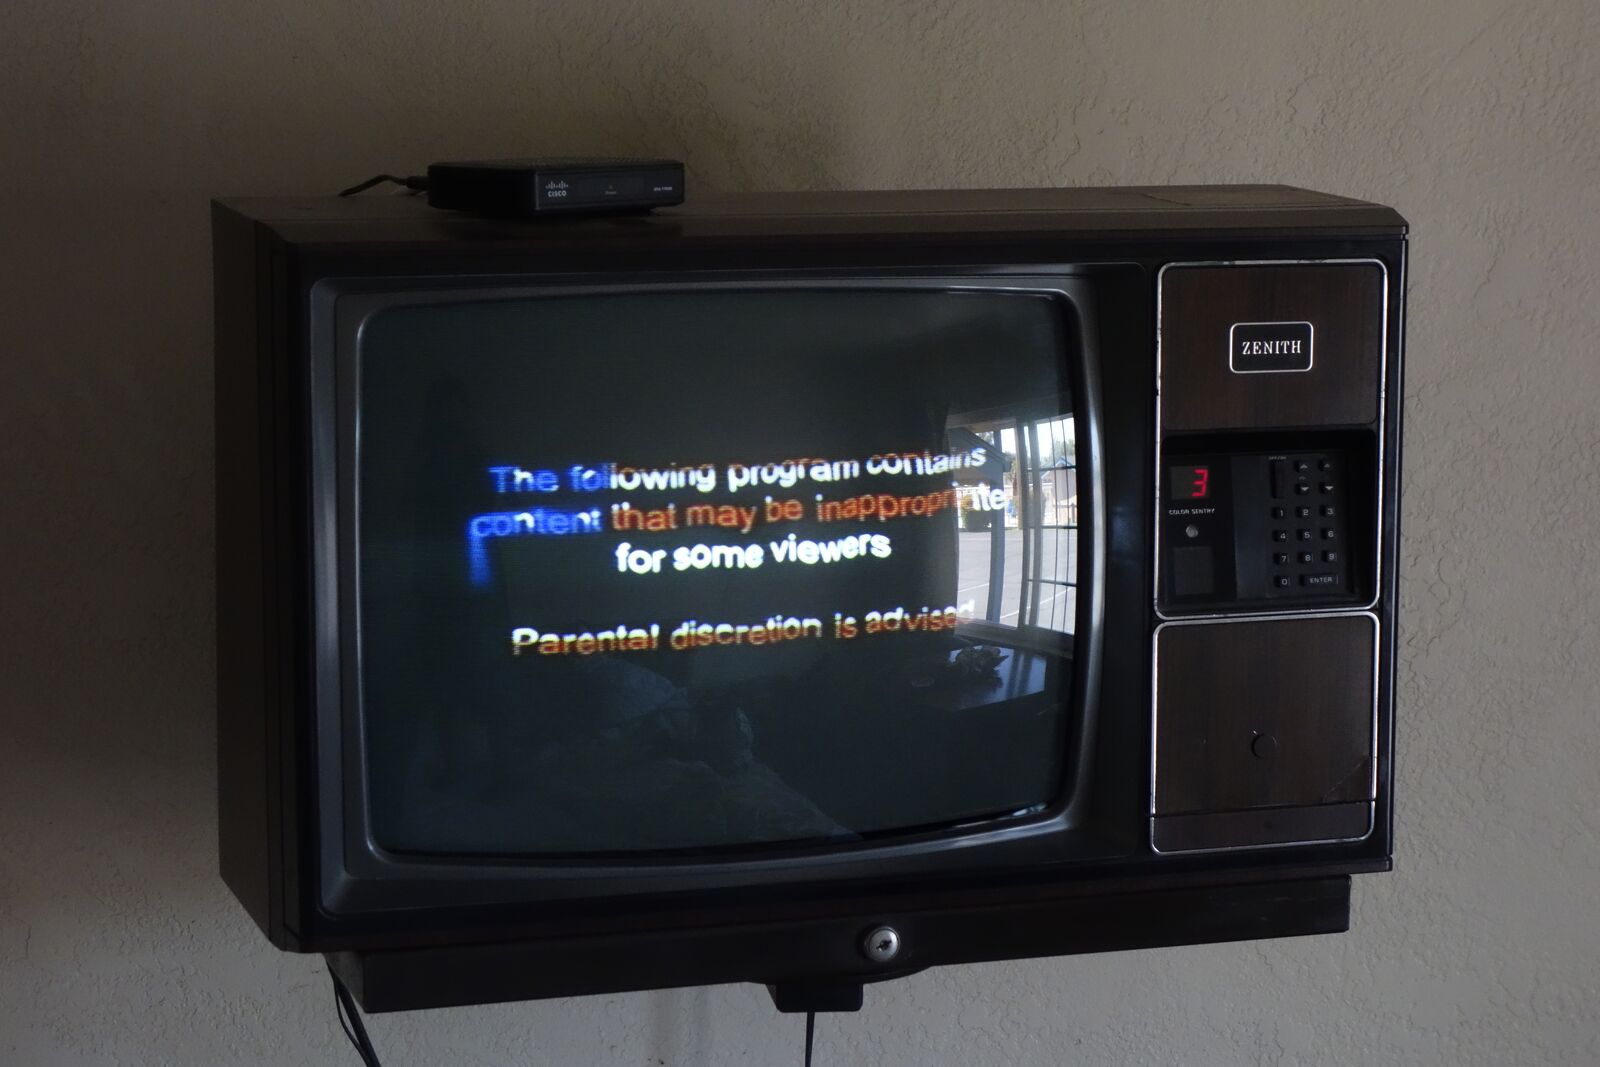 Photograph: an 80s "Zenith" TV mounted on the wall. The screen shows a distorted text, a parental discretion warning; the text is colored as the US flag.